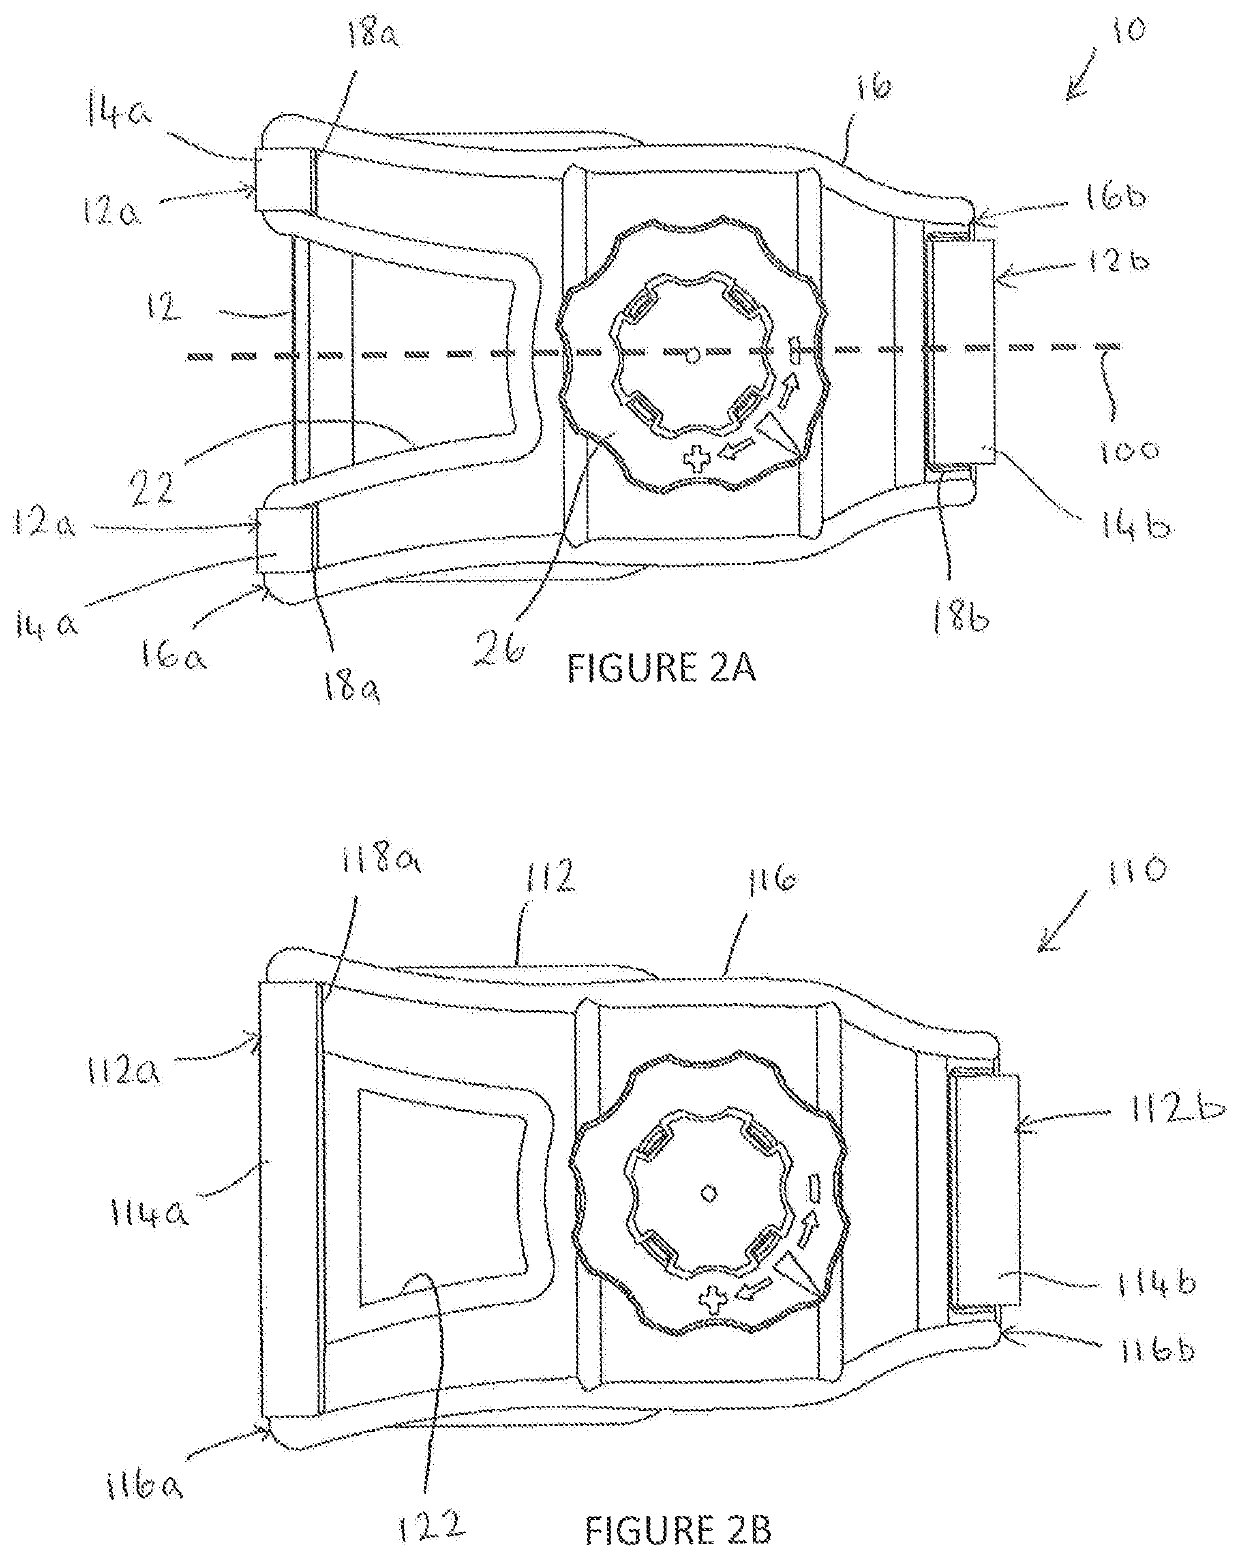 Arterial compression device and methods of using the same